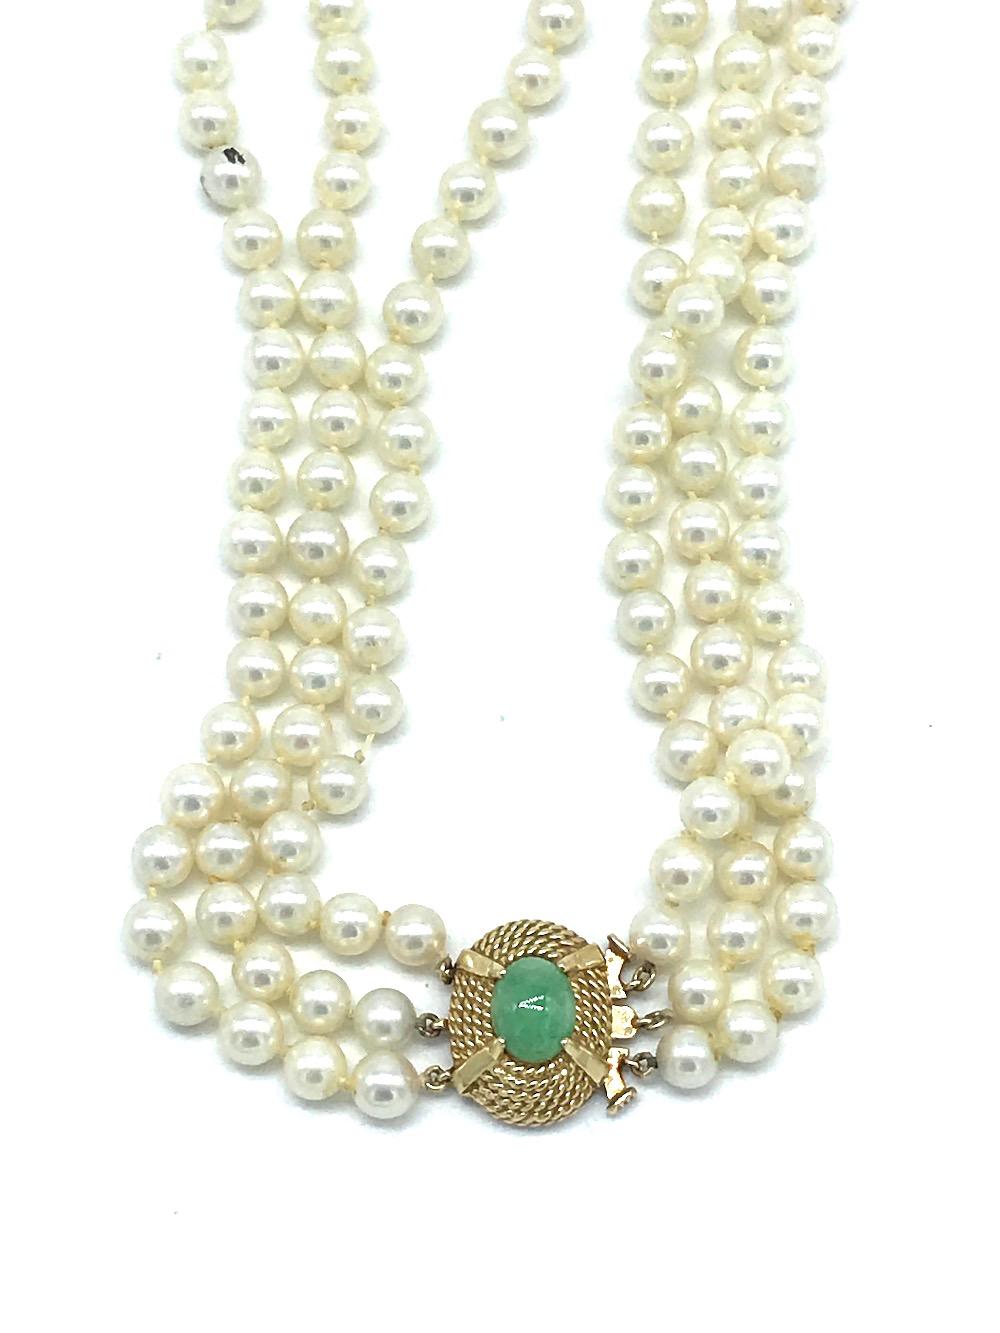 Vintage, Jade Clasp on 3-Strand 6 mm Pearl, Necklace 
Graduated rows measuring 15-16-1/2 inches in length. Large 14 karat gold oval shaped, rope textured clasp measuring 19.05 x 15.5 mm wide. Jade is marbled colored green 10 x 9 mm, oval shaped